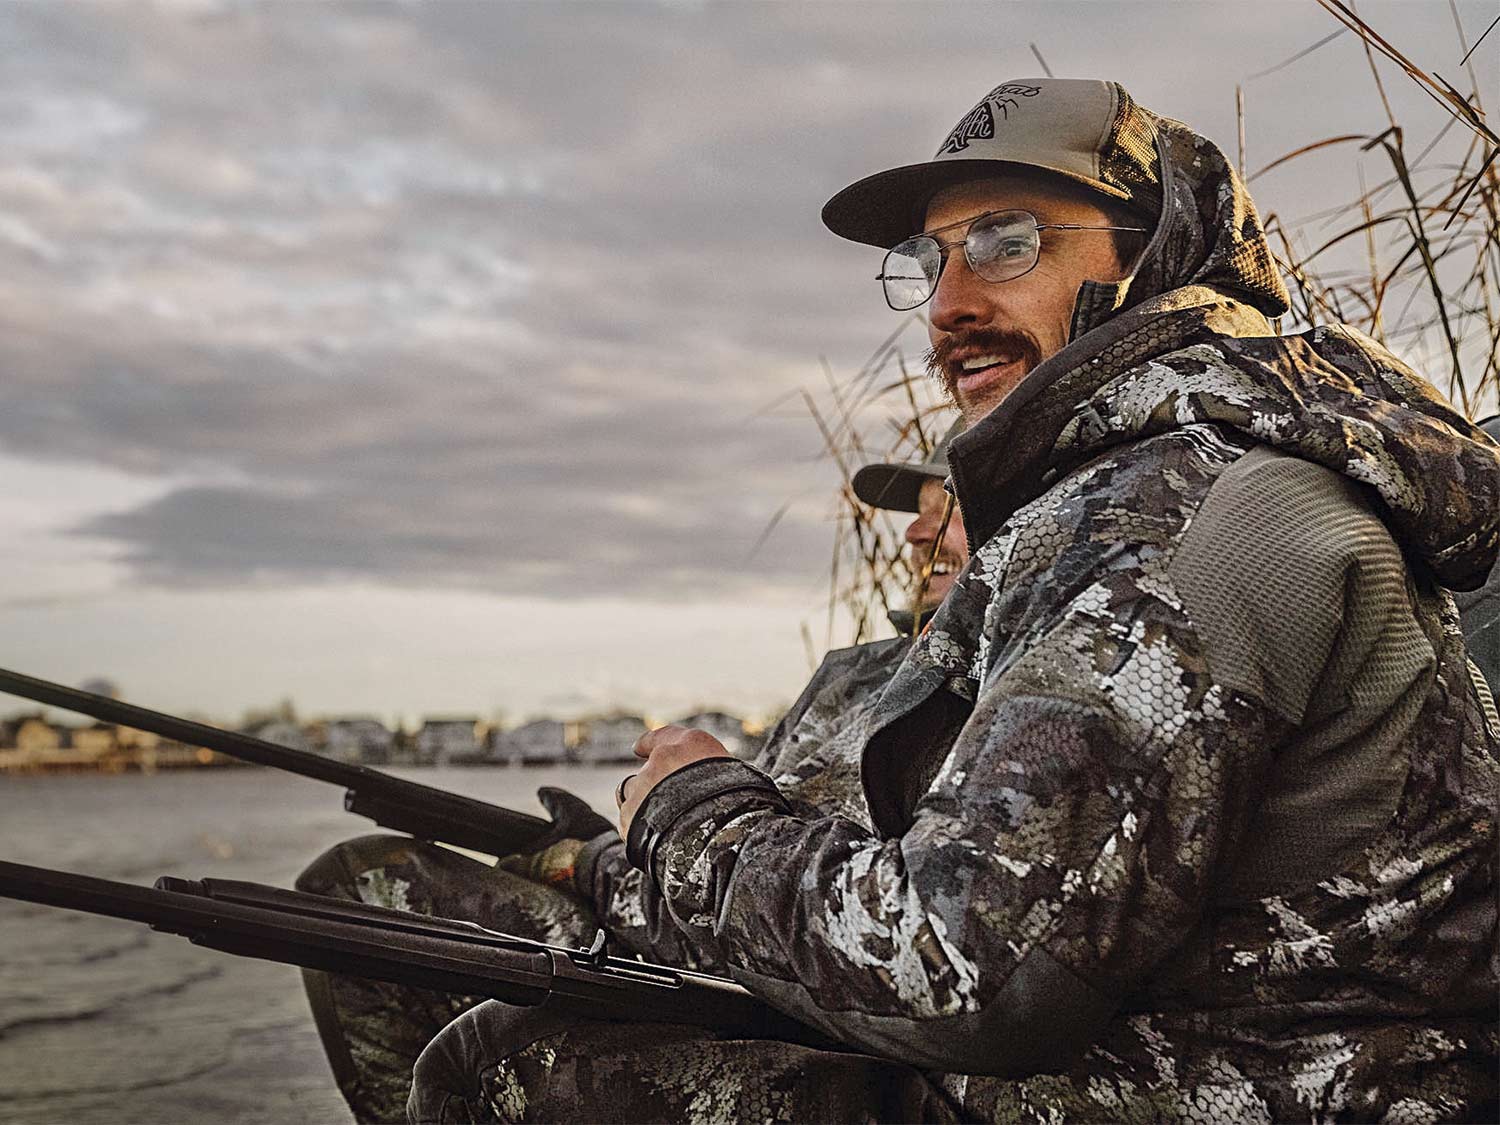 A man in glasses and wearing full camo sits by the waterside with a shotgun in his lap.